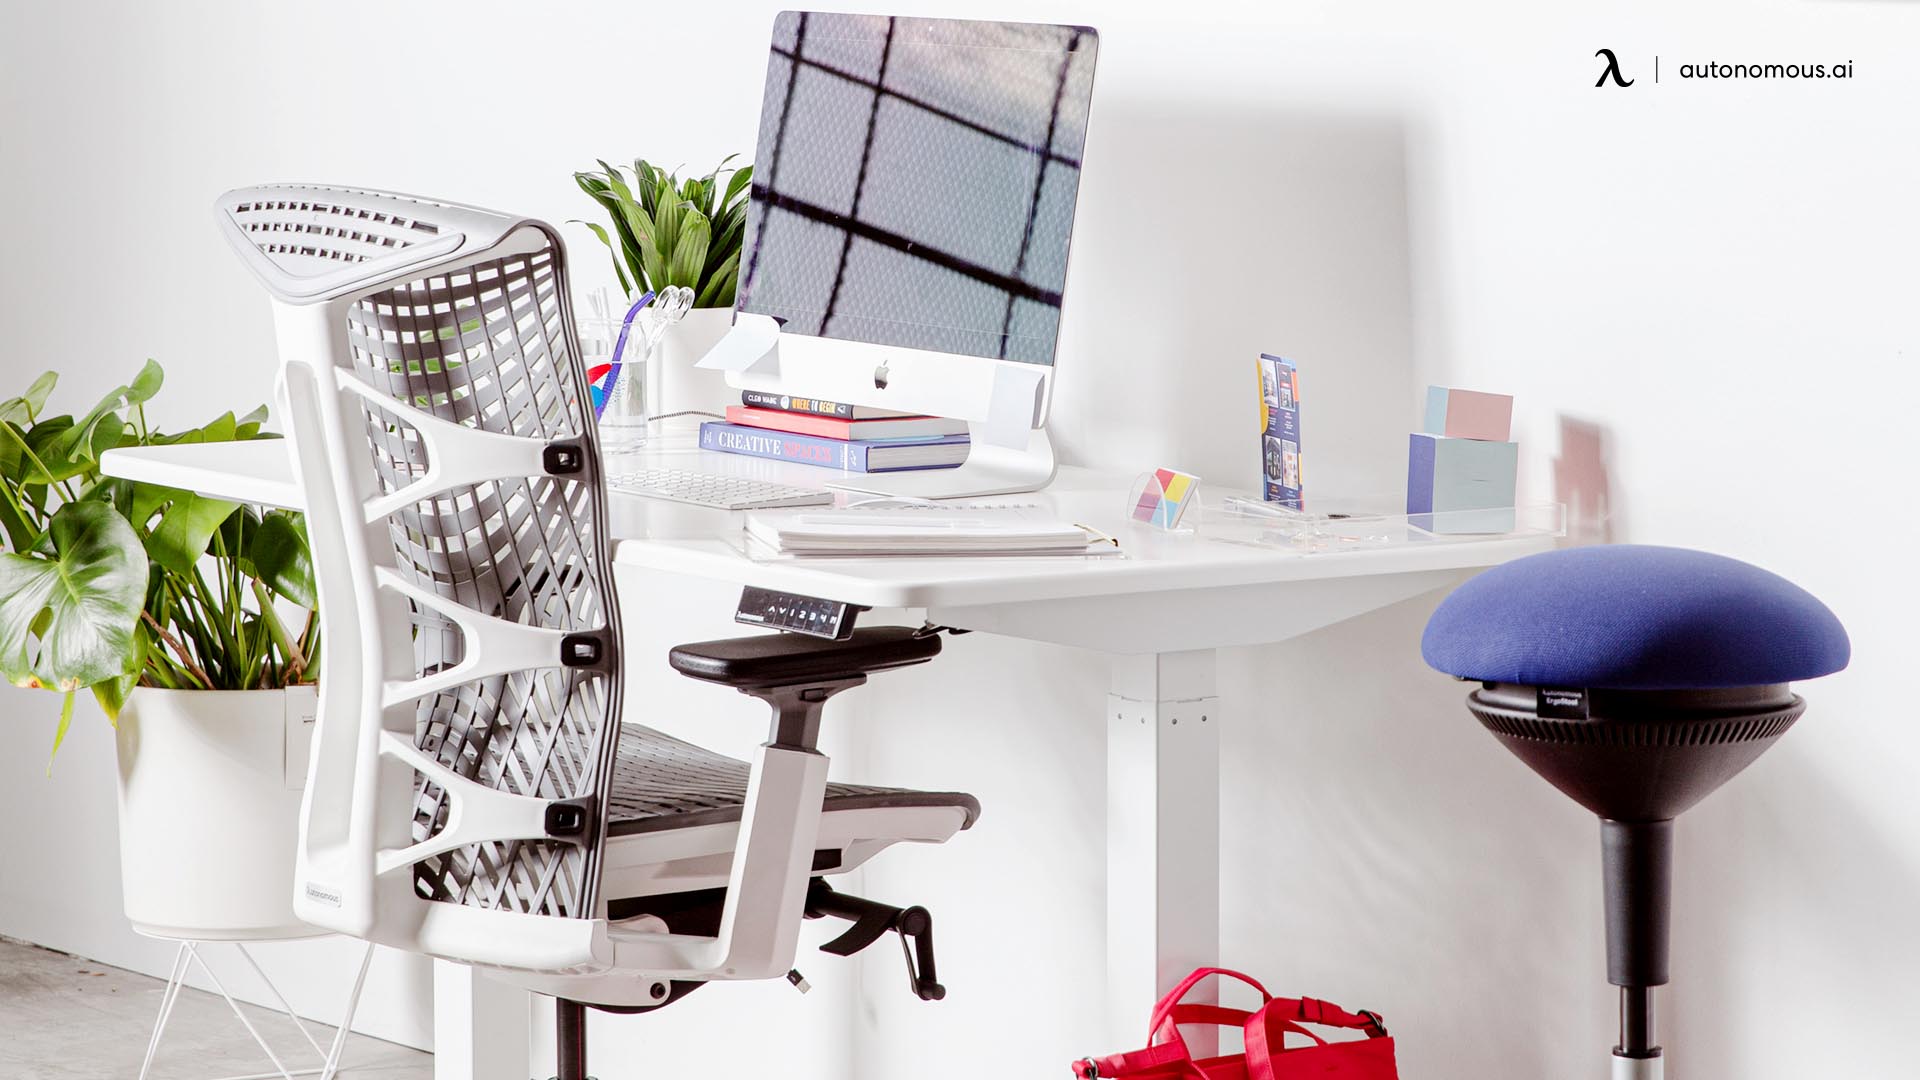 5 Cool Home Office Design Ideas for an Inspirational Workplace